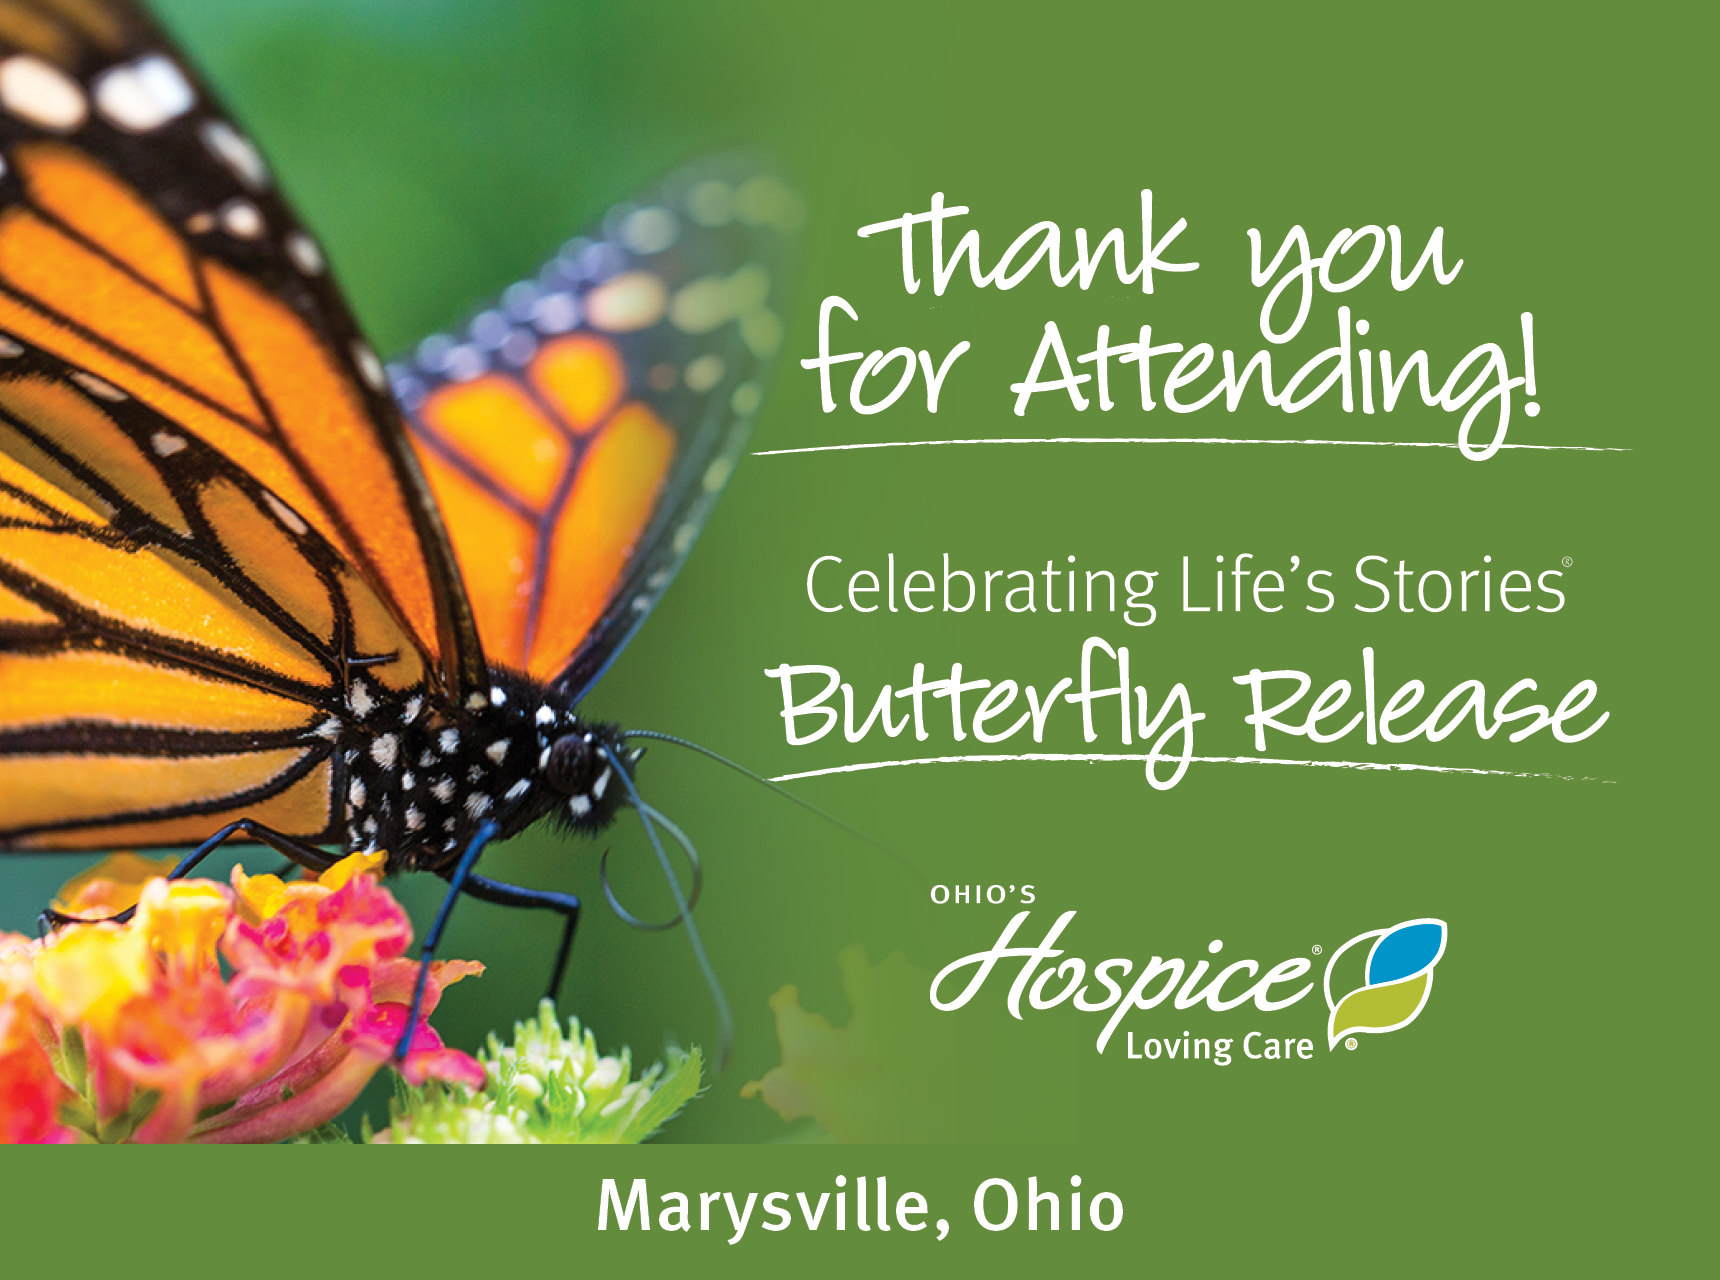 Thank you for attending! Butterfly Release 2023. Ohio's Hospice Loving Care